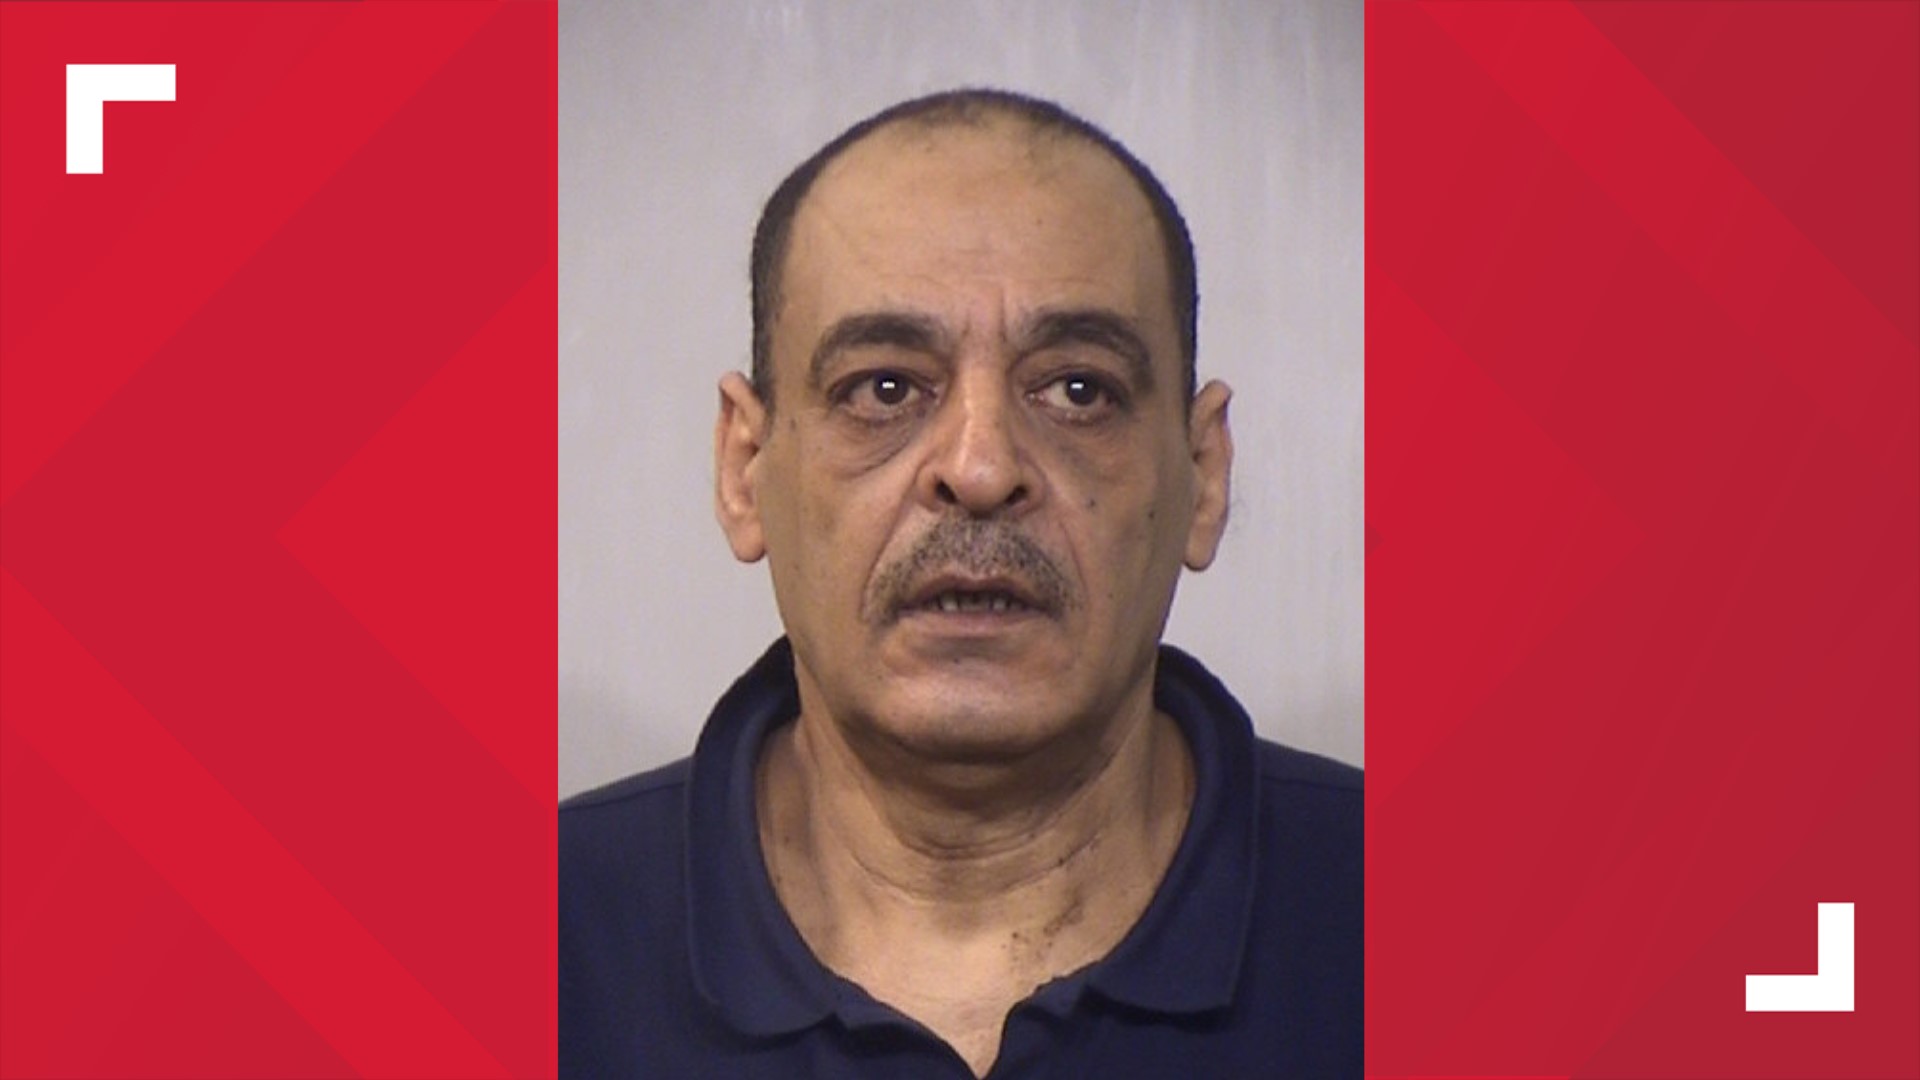 Yaser Abdel Said is accused of shooting and killing his two daughters, 18-year-old Amina and 17-year-old Sarah in 2008 outside an Omni hotel in Irving, Texas.